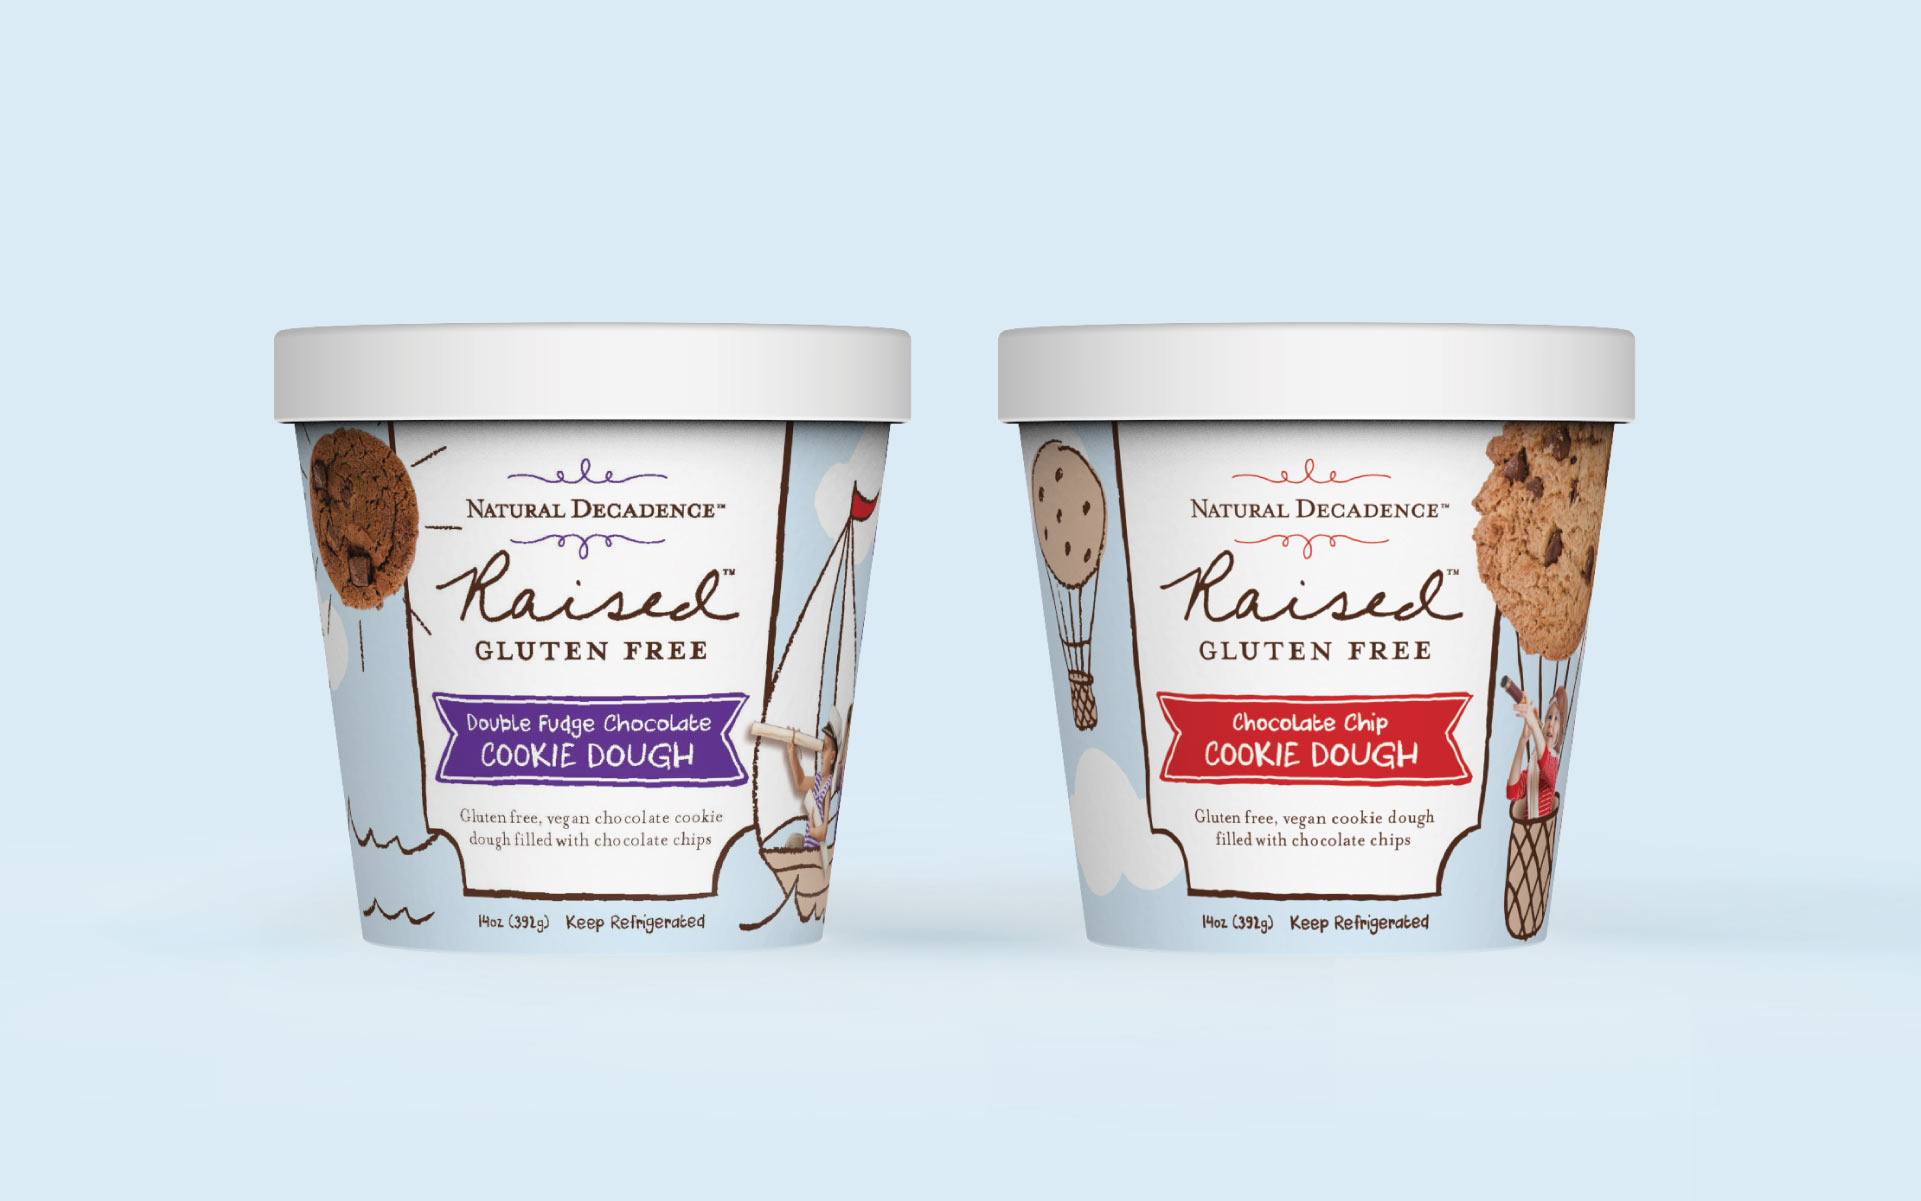 Custom packaging design by Creative Retail Packaging for Raised Natural Decadence, showcasing brand identity.